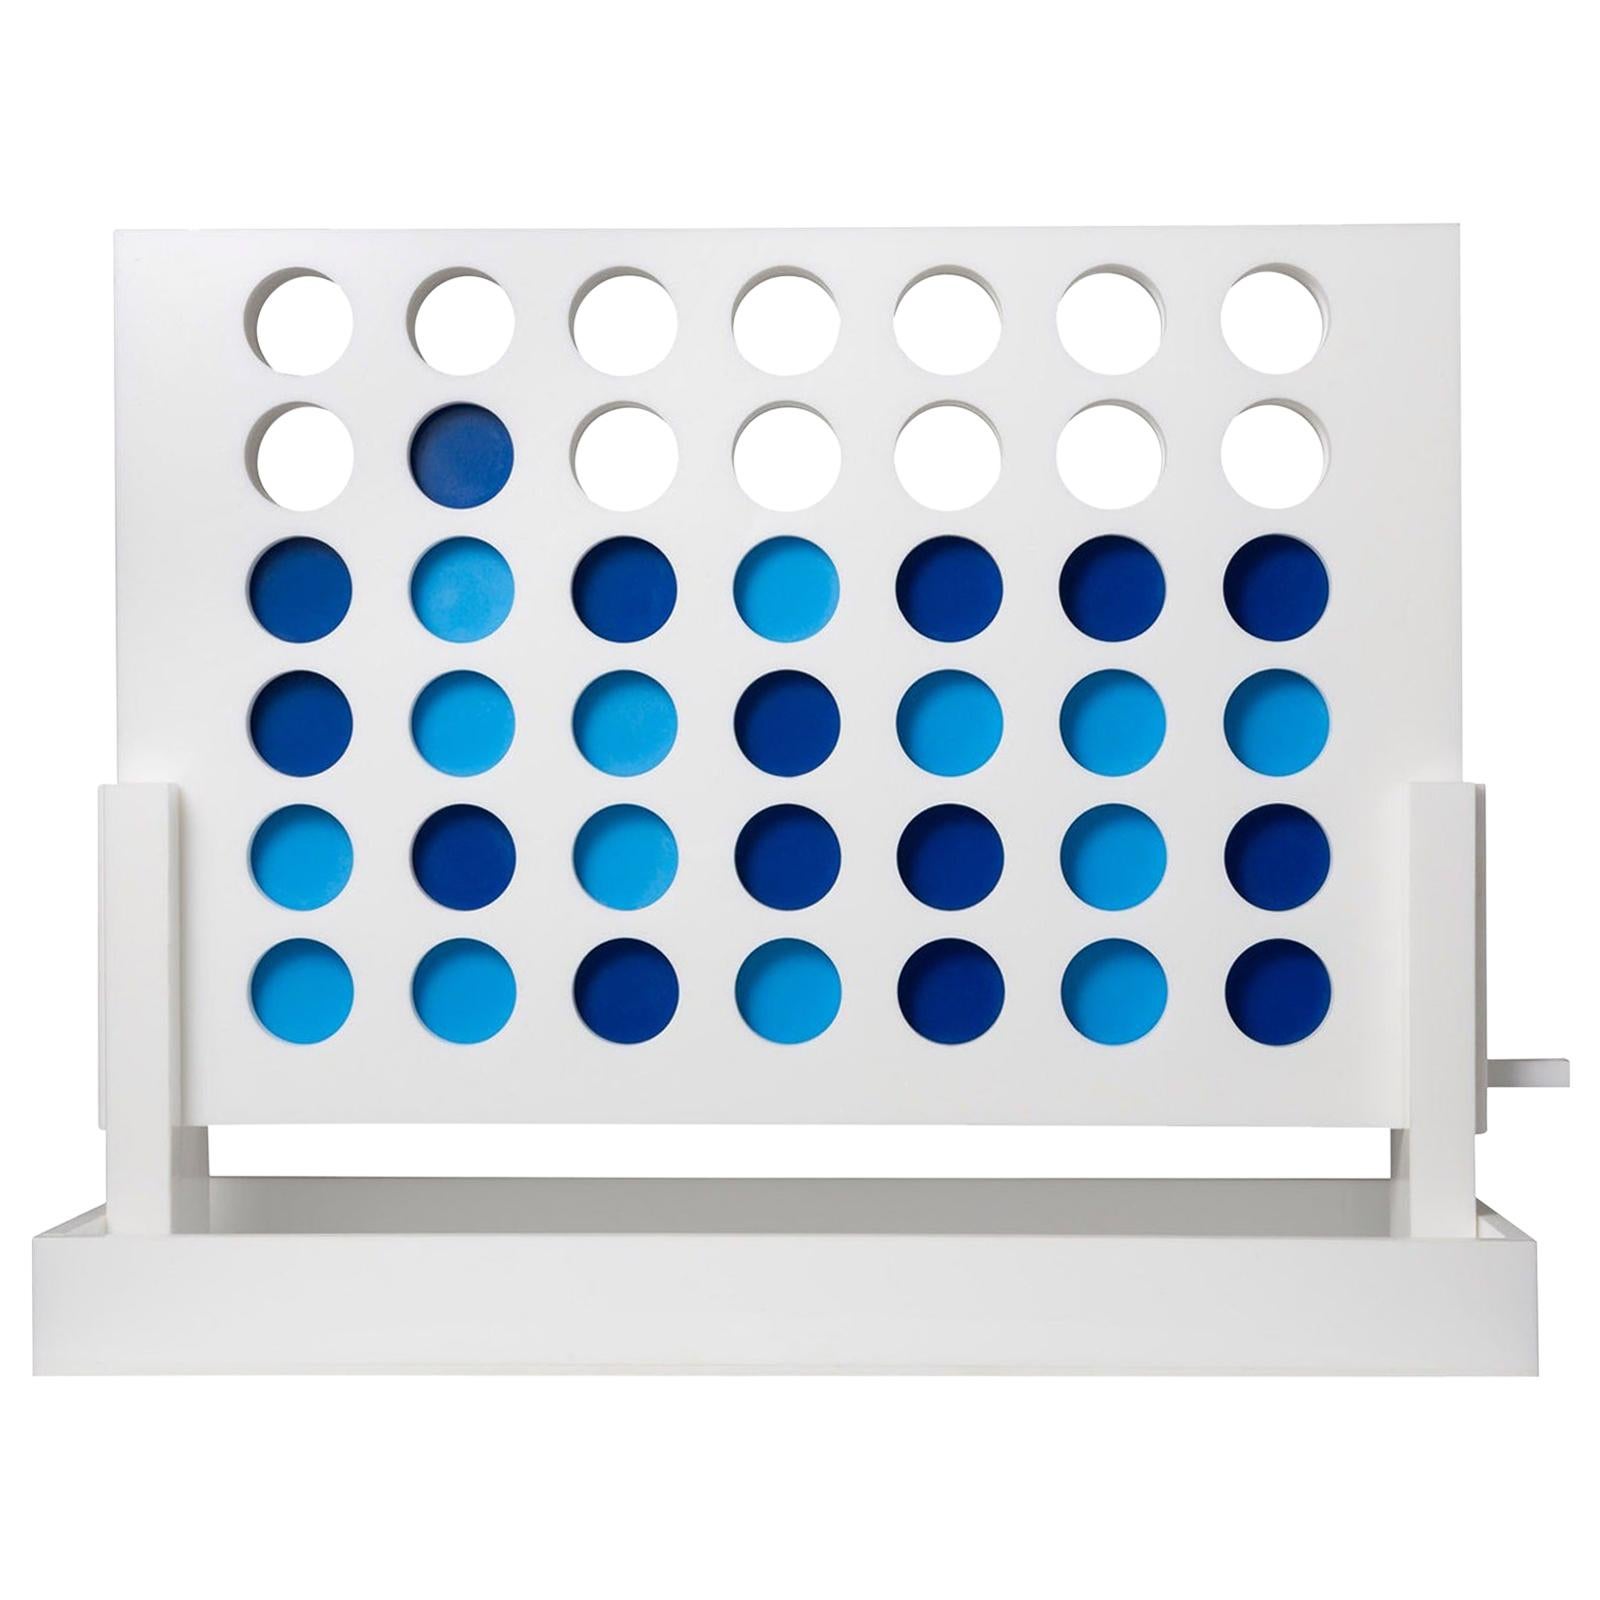 White and Blue Acrylic Connect Four Game